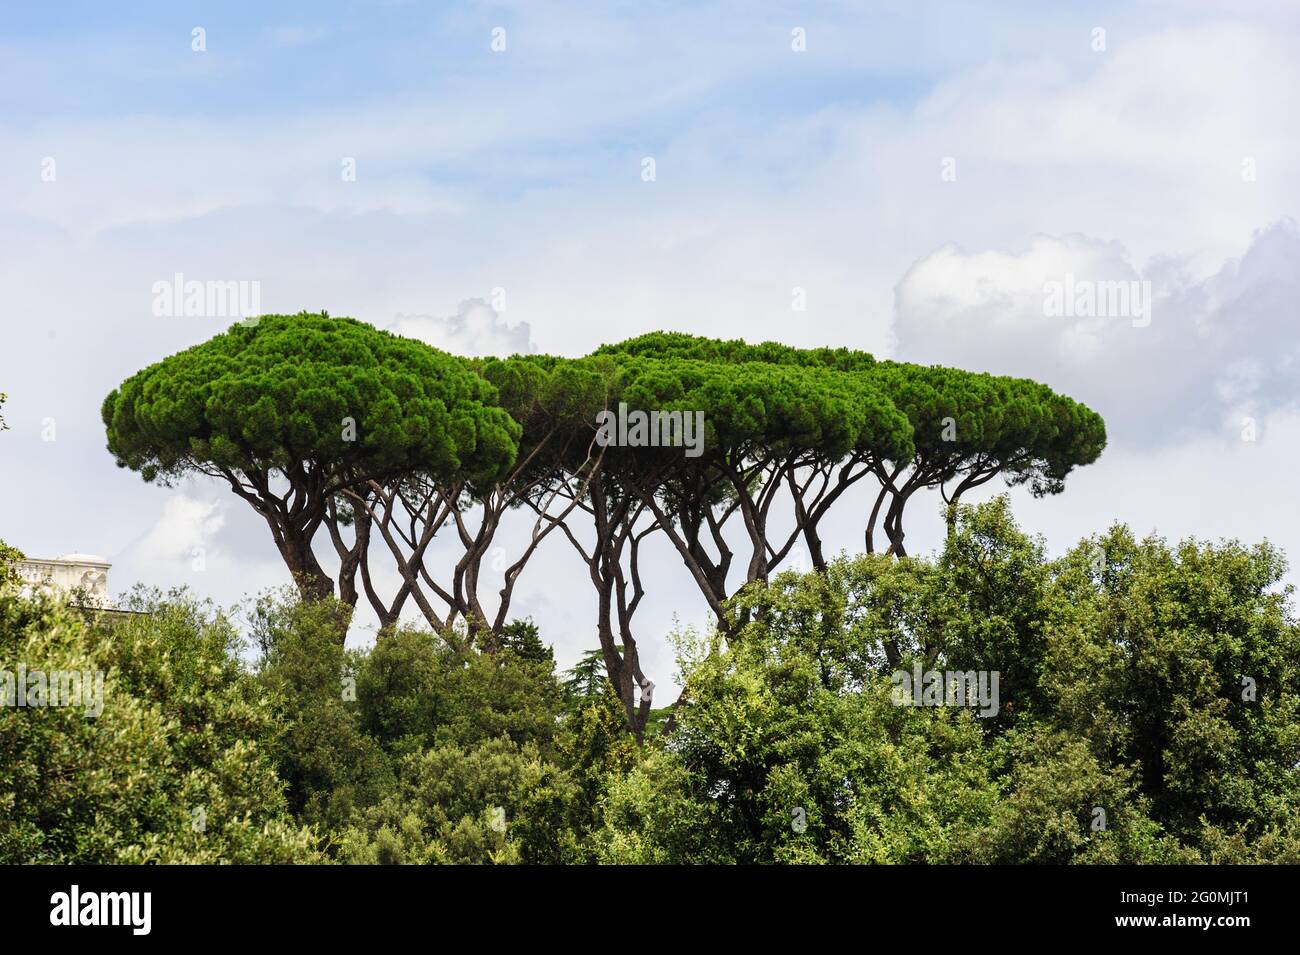 Rome park view with typical umbrella pine trees Stock Photo